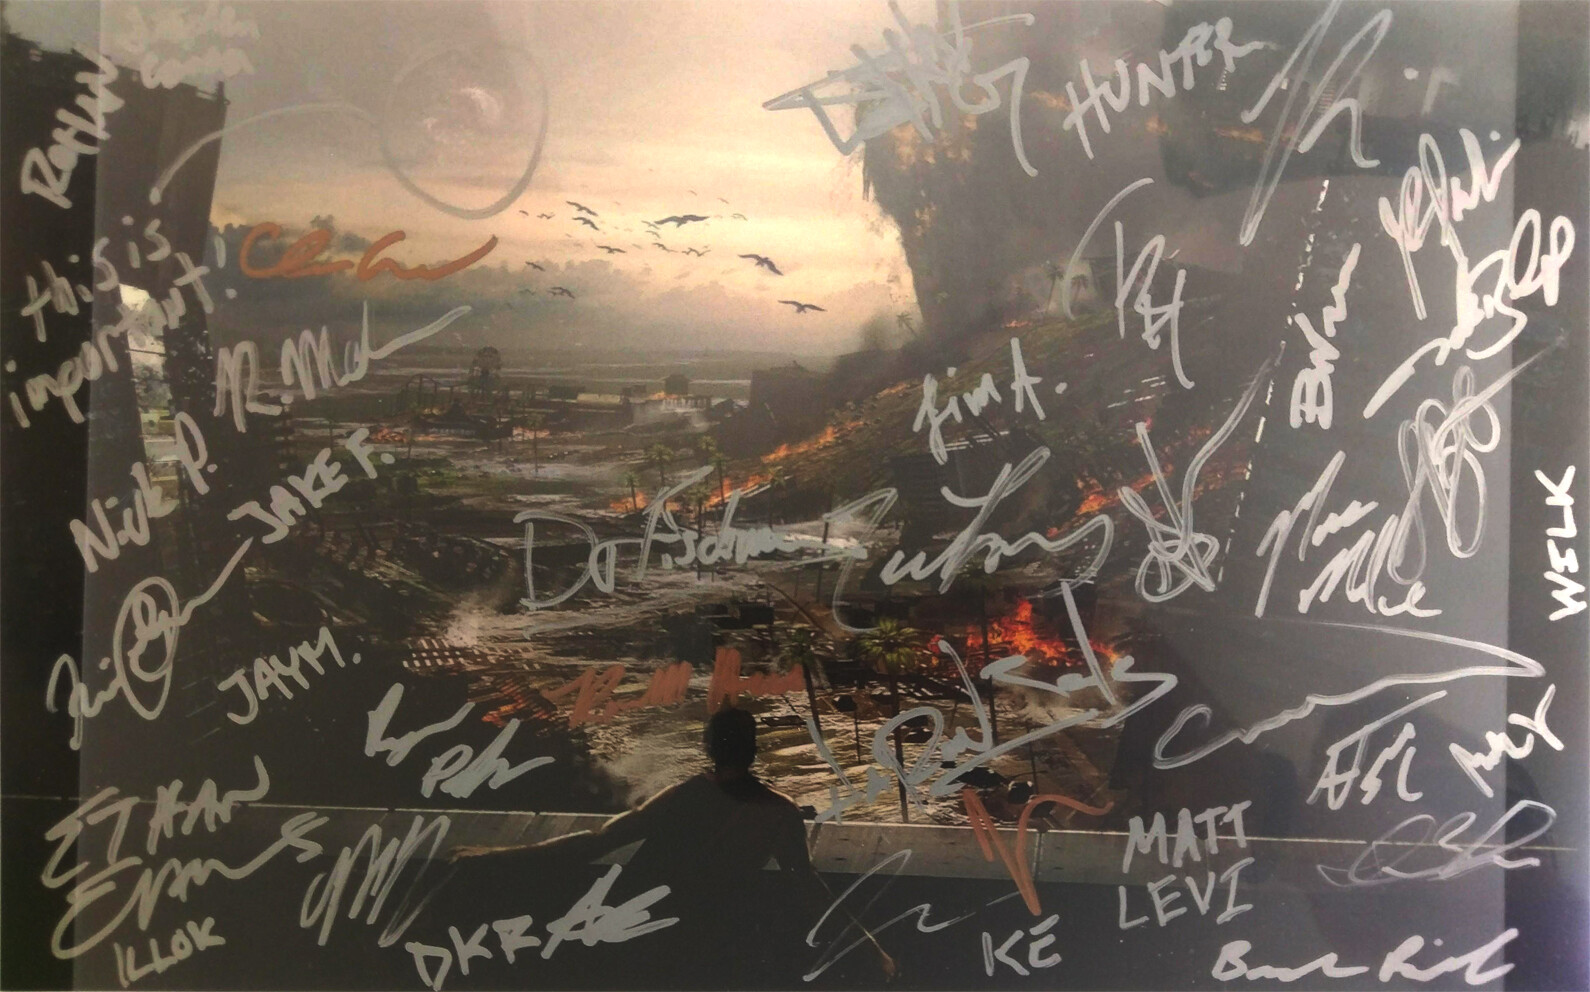 This is a fan's photo that won a contest for Lawbreakers and recieved a print of my concept, signed by several employees at Boss Key Productions! Pretty cool!